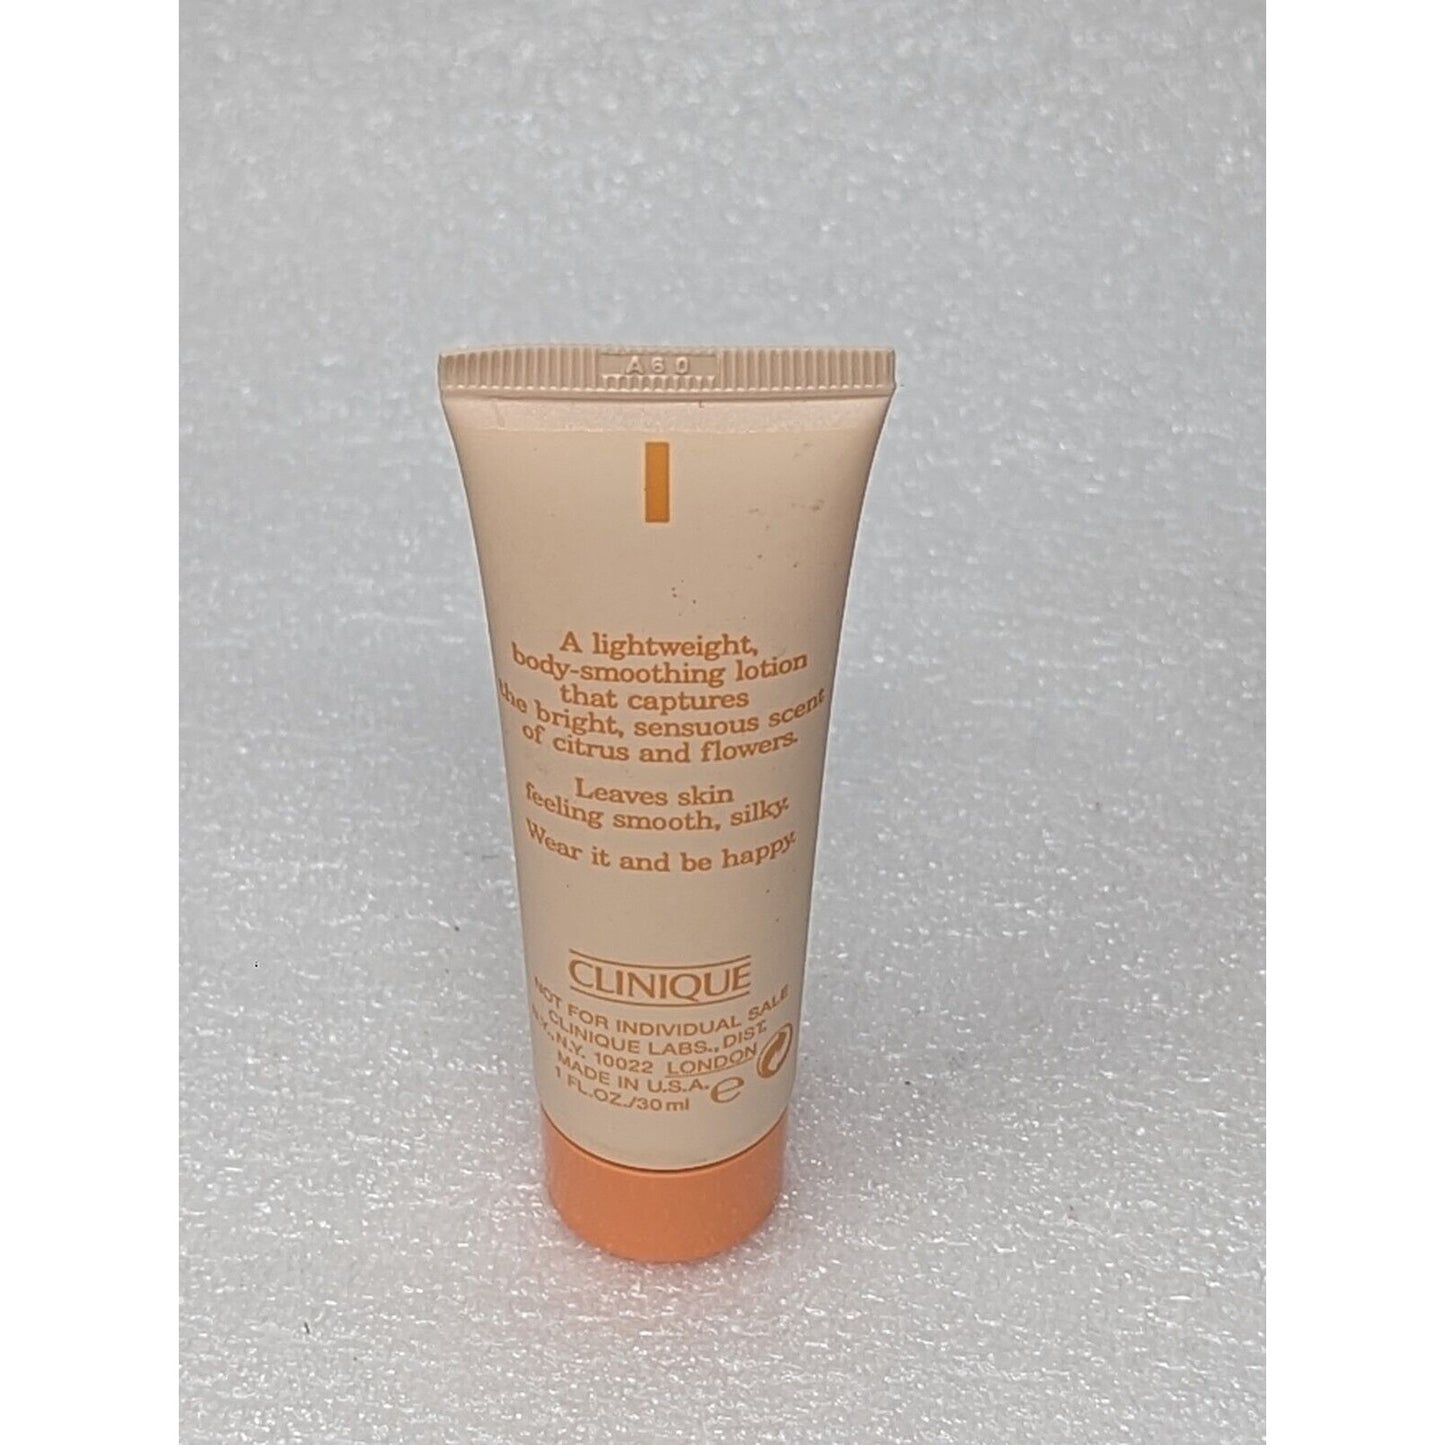 Clinique Happy Body Smoother 1 oz Travel Size